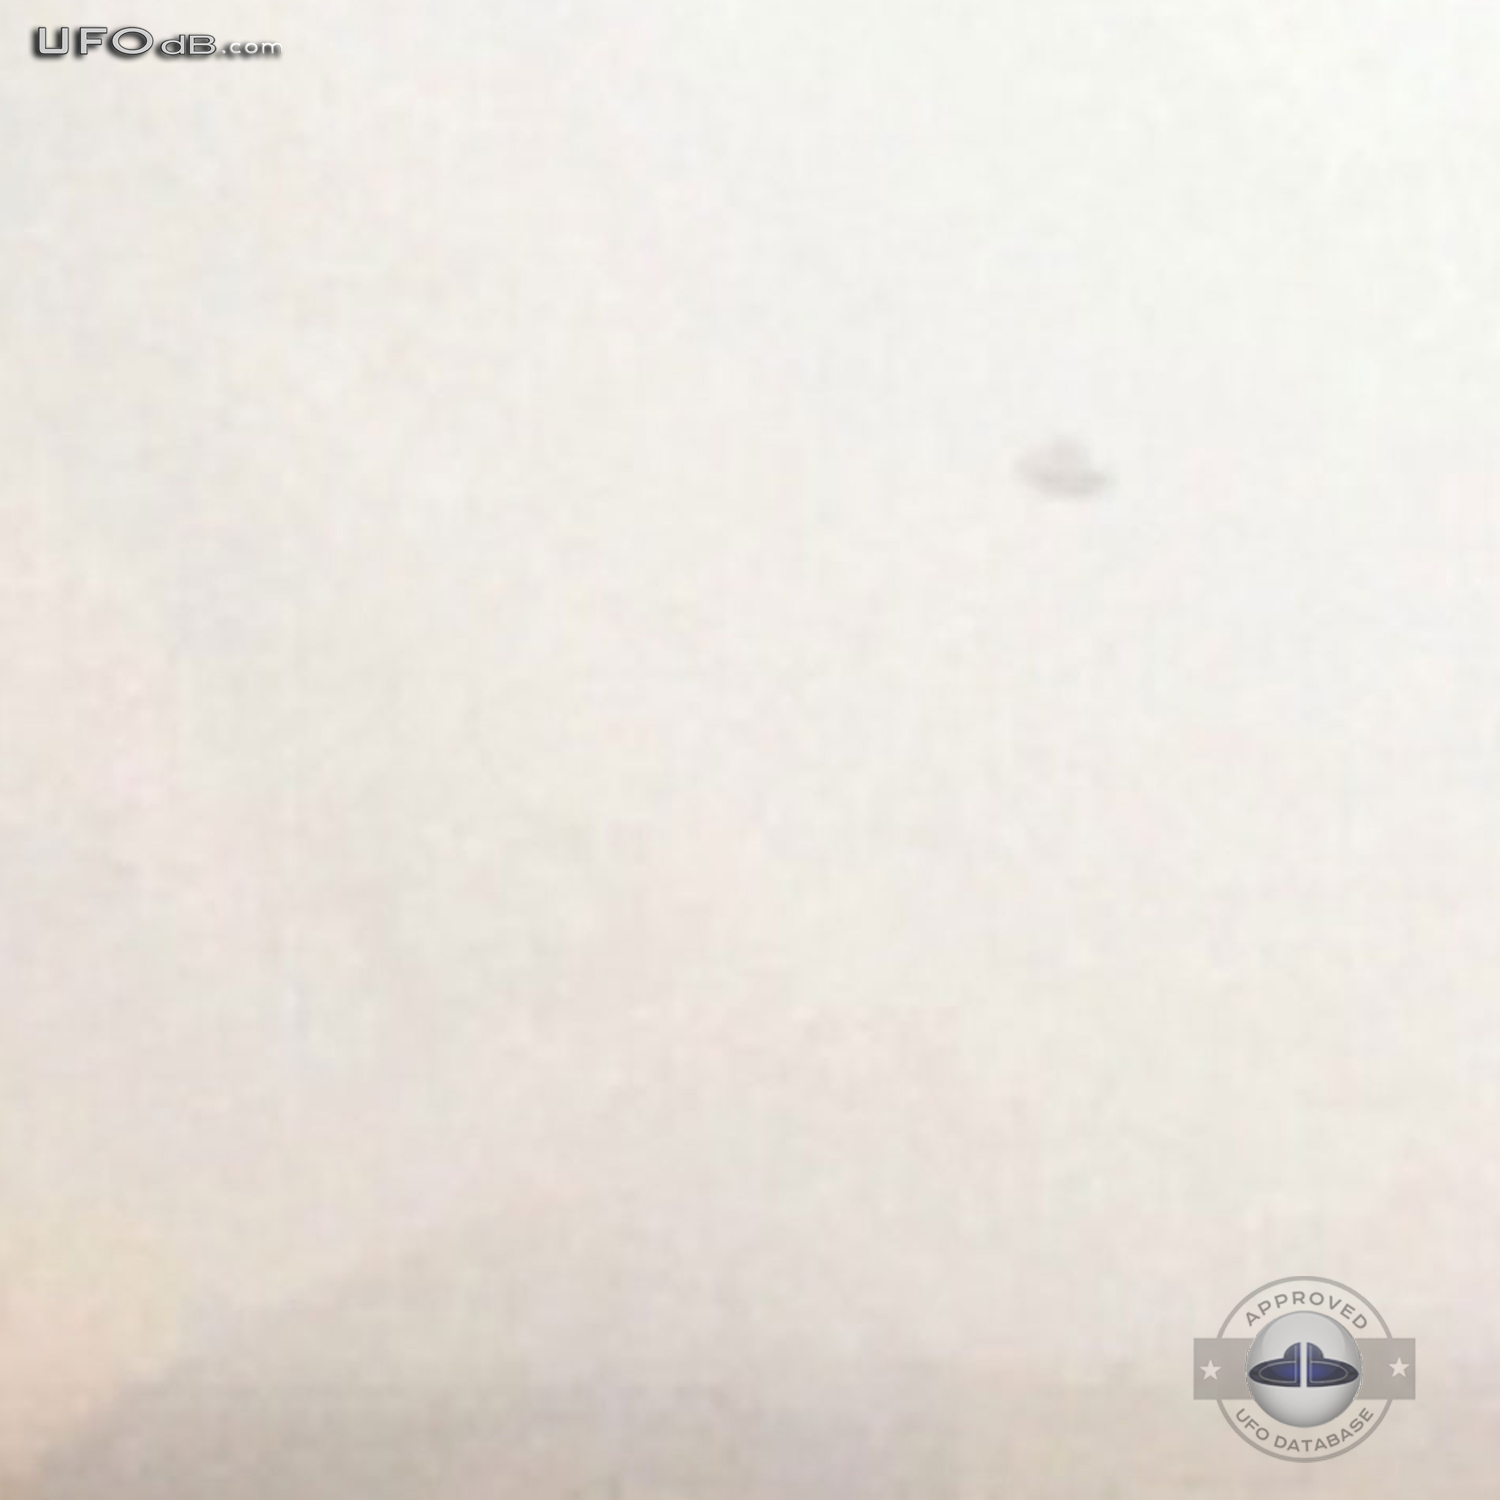 Chinese Sales manager get UFO picture on Hangzhou Bay Bridge in China UFO Picture #359-2